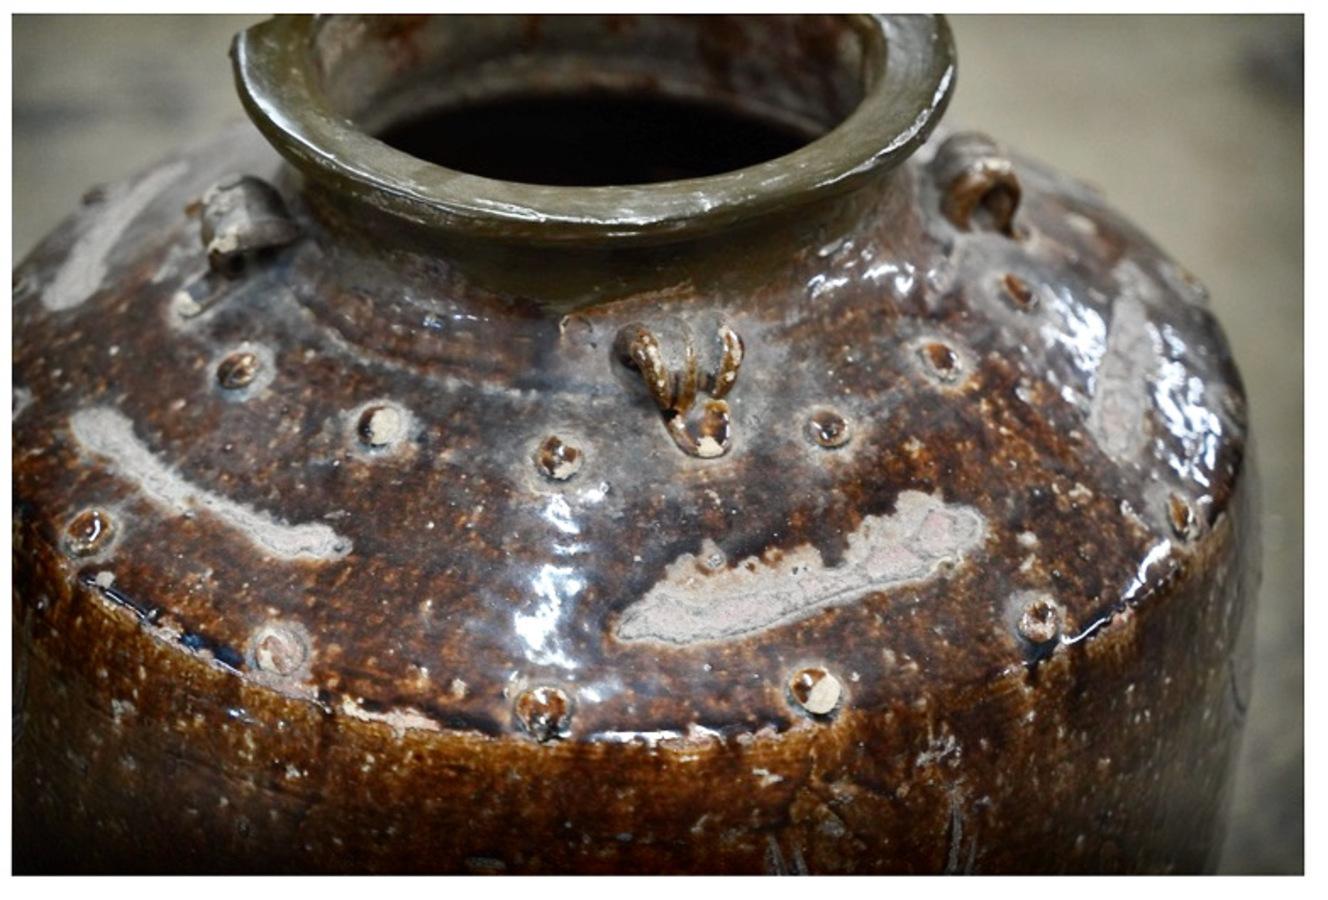 This is a large Chinese 17th Century Stoneware Martaban Jar. Martancan Jars were created to store food items such as grain, tea, oil, etc. The larger jars were created to transport other fragile items such as ceramics and porcelain. This jar shows a